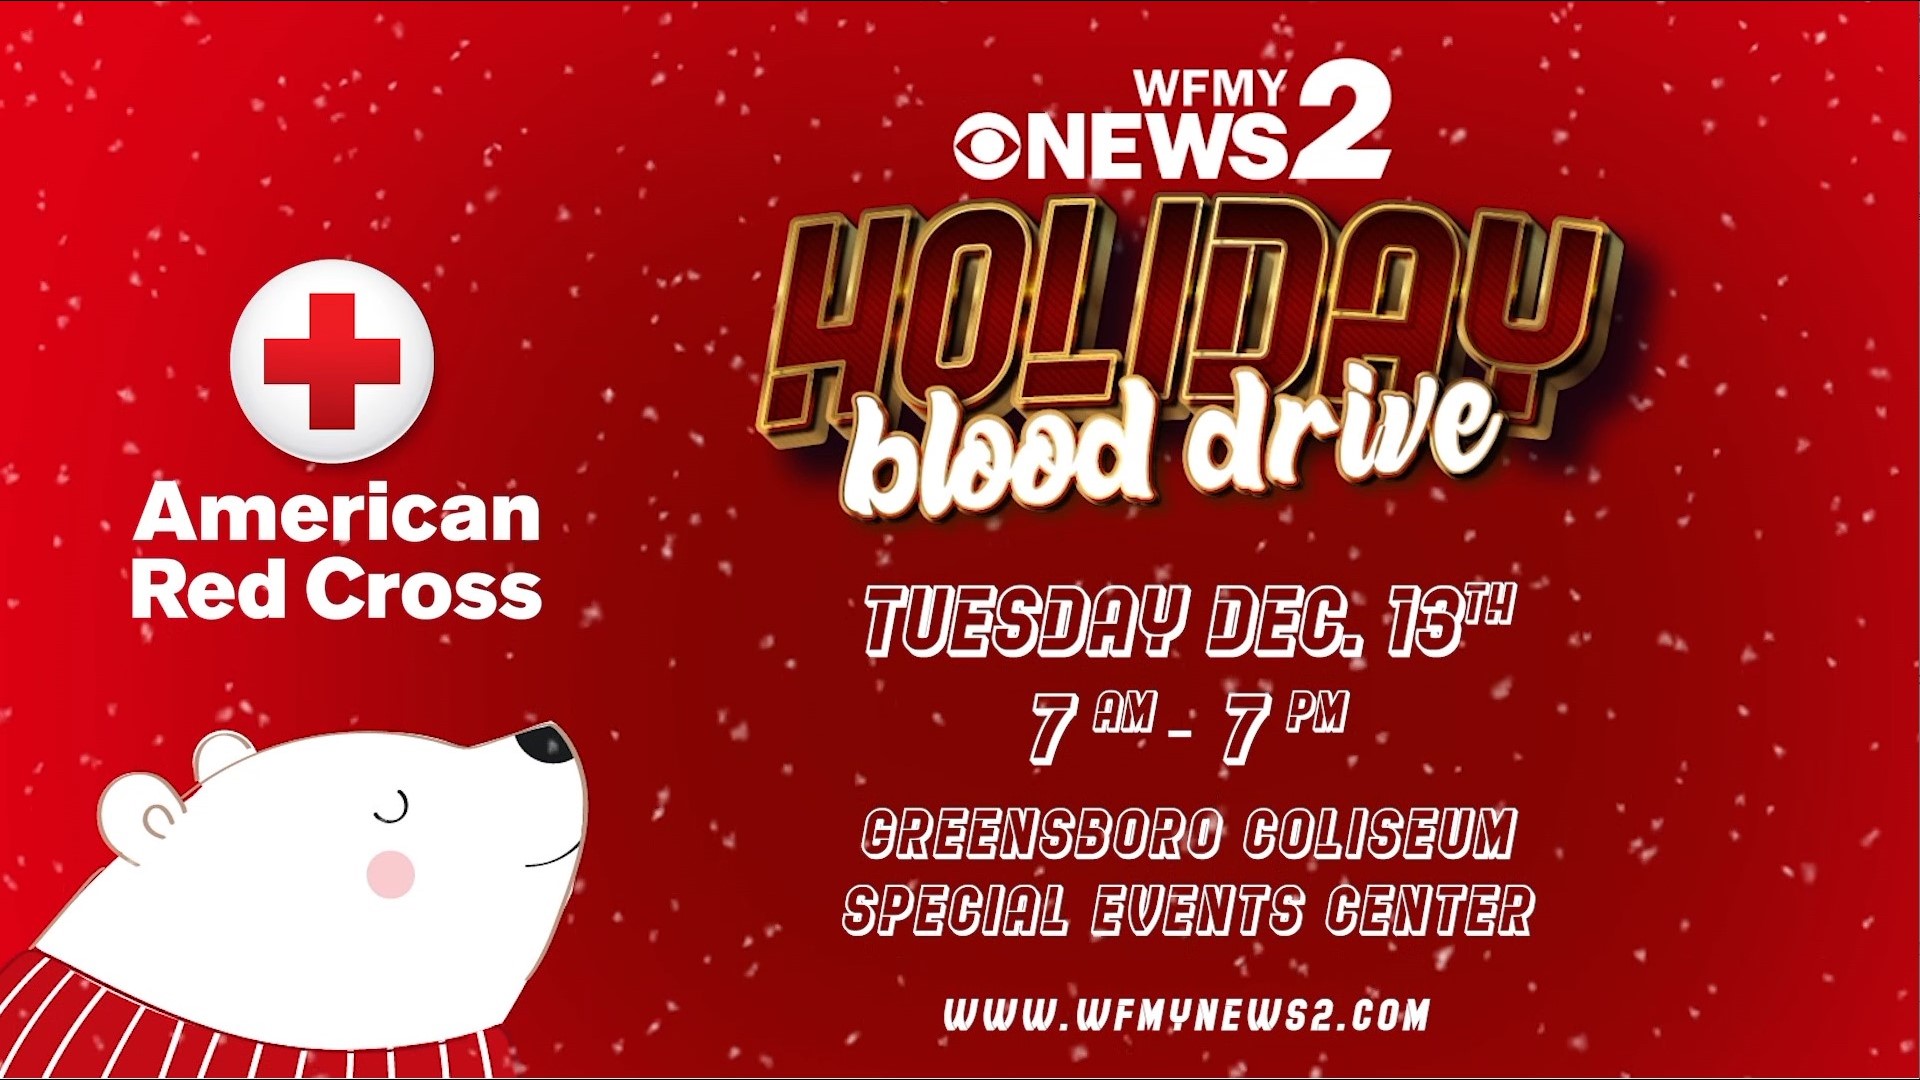 The WFMY News 2 Holiday blood drive is happening Tuesday, Dec. 13 at the Greensboro Coliseum Special Event Center.